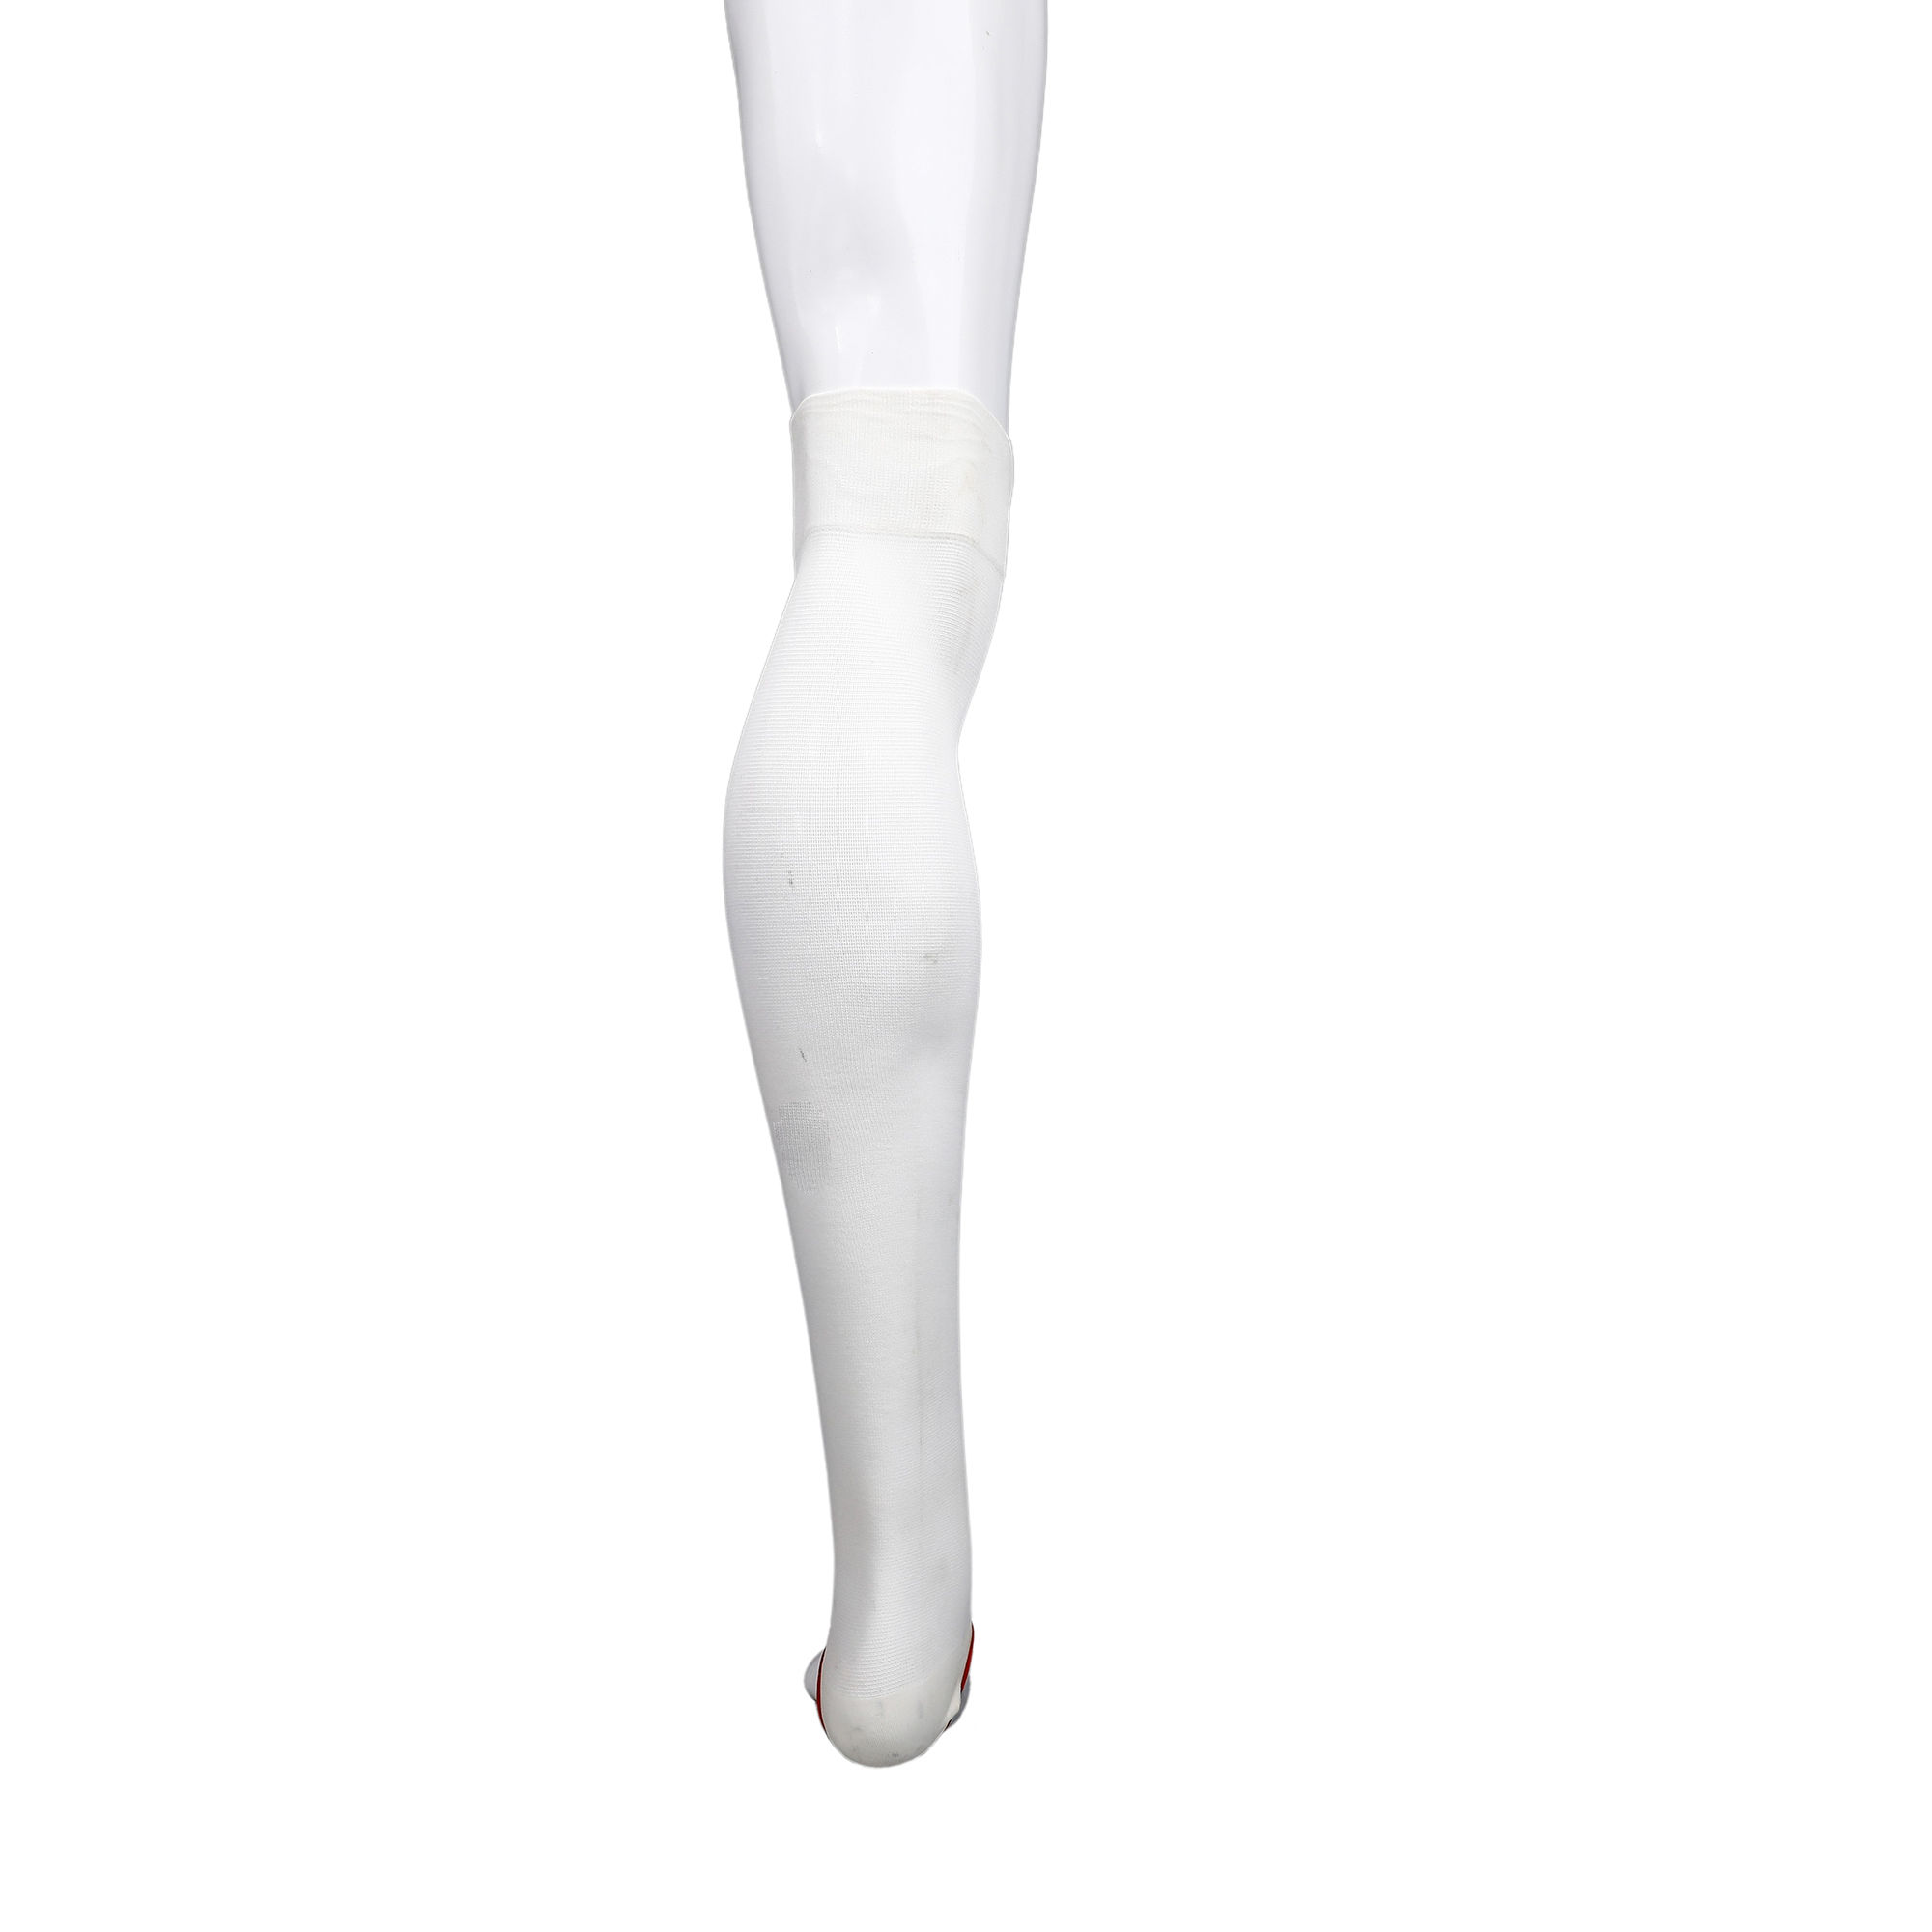 C-Med Compression Stocking Ad Xl-Knee, Pack of 1 